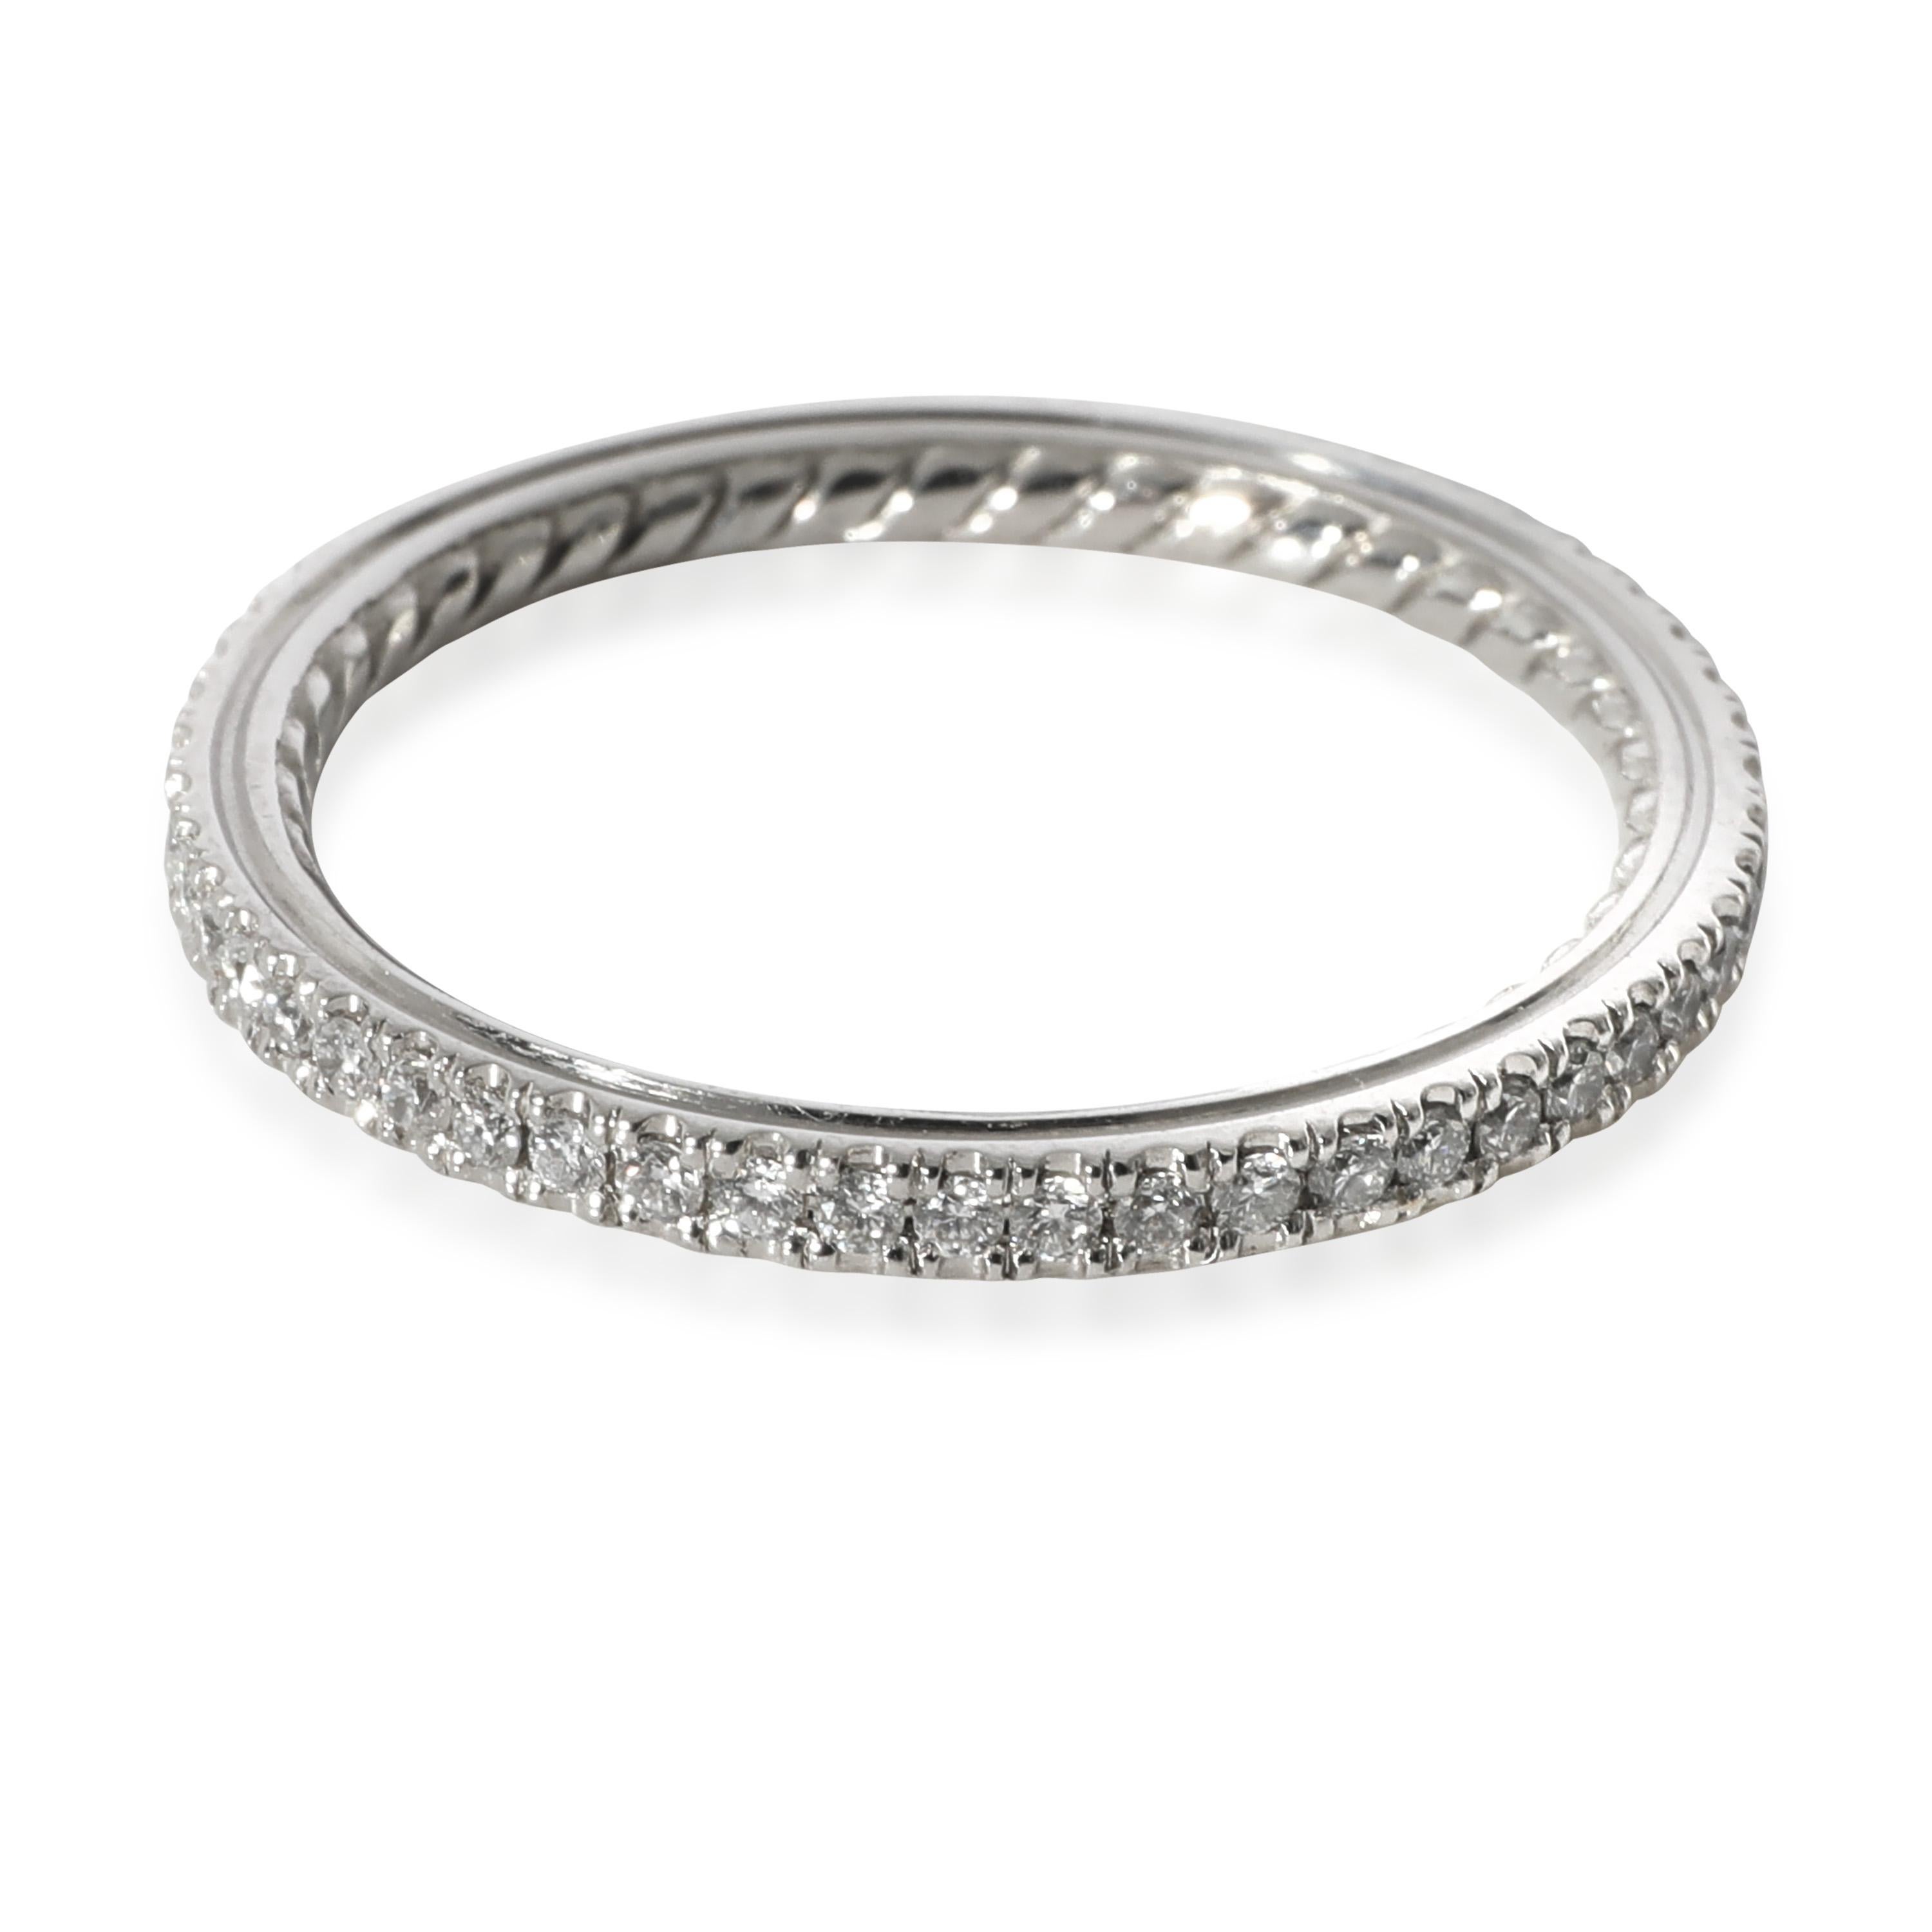 David Yurman Eden Diamond Wedding Band in  Platinum 0.43 CTW

PRIMARY DETAILS
SKU: 129452
Listing Title: David Yurman Eden Diamond Wedding Band in  Platinum 0.43 CTW
Condition Description: Retails for 2800 USD. In excellent condition. Ring size is